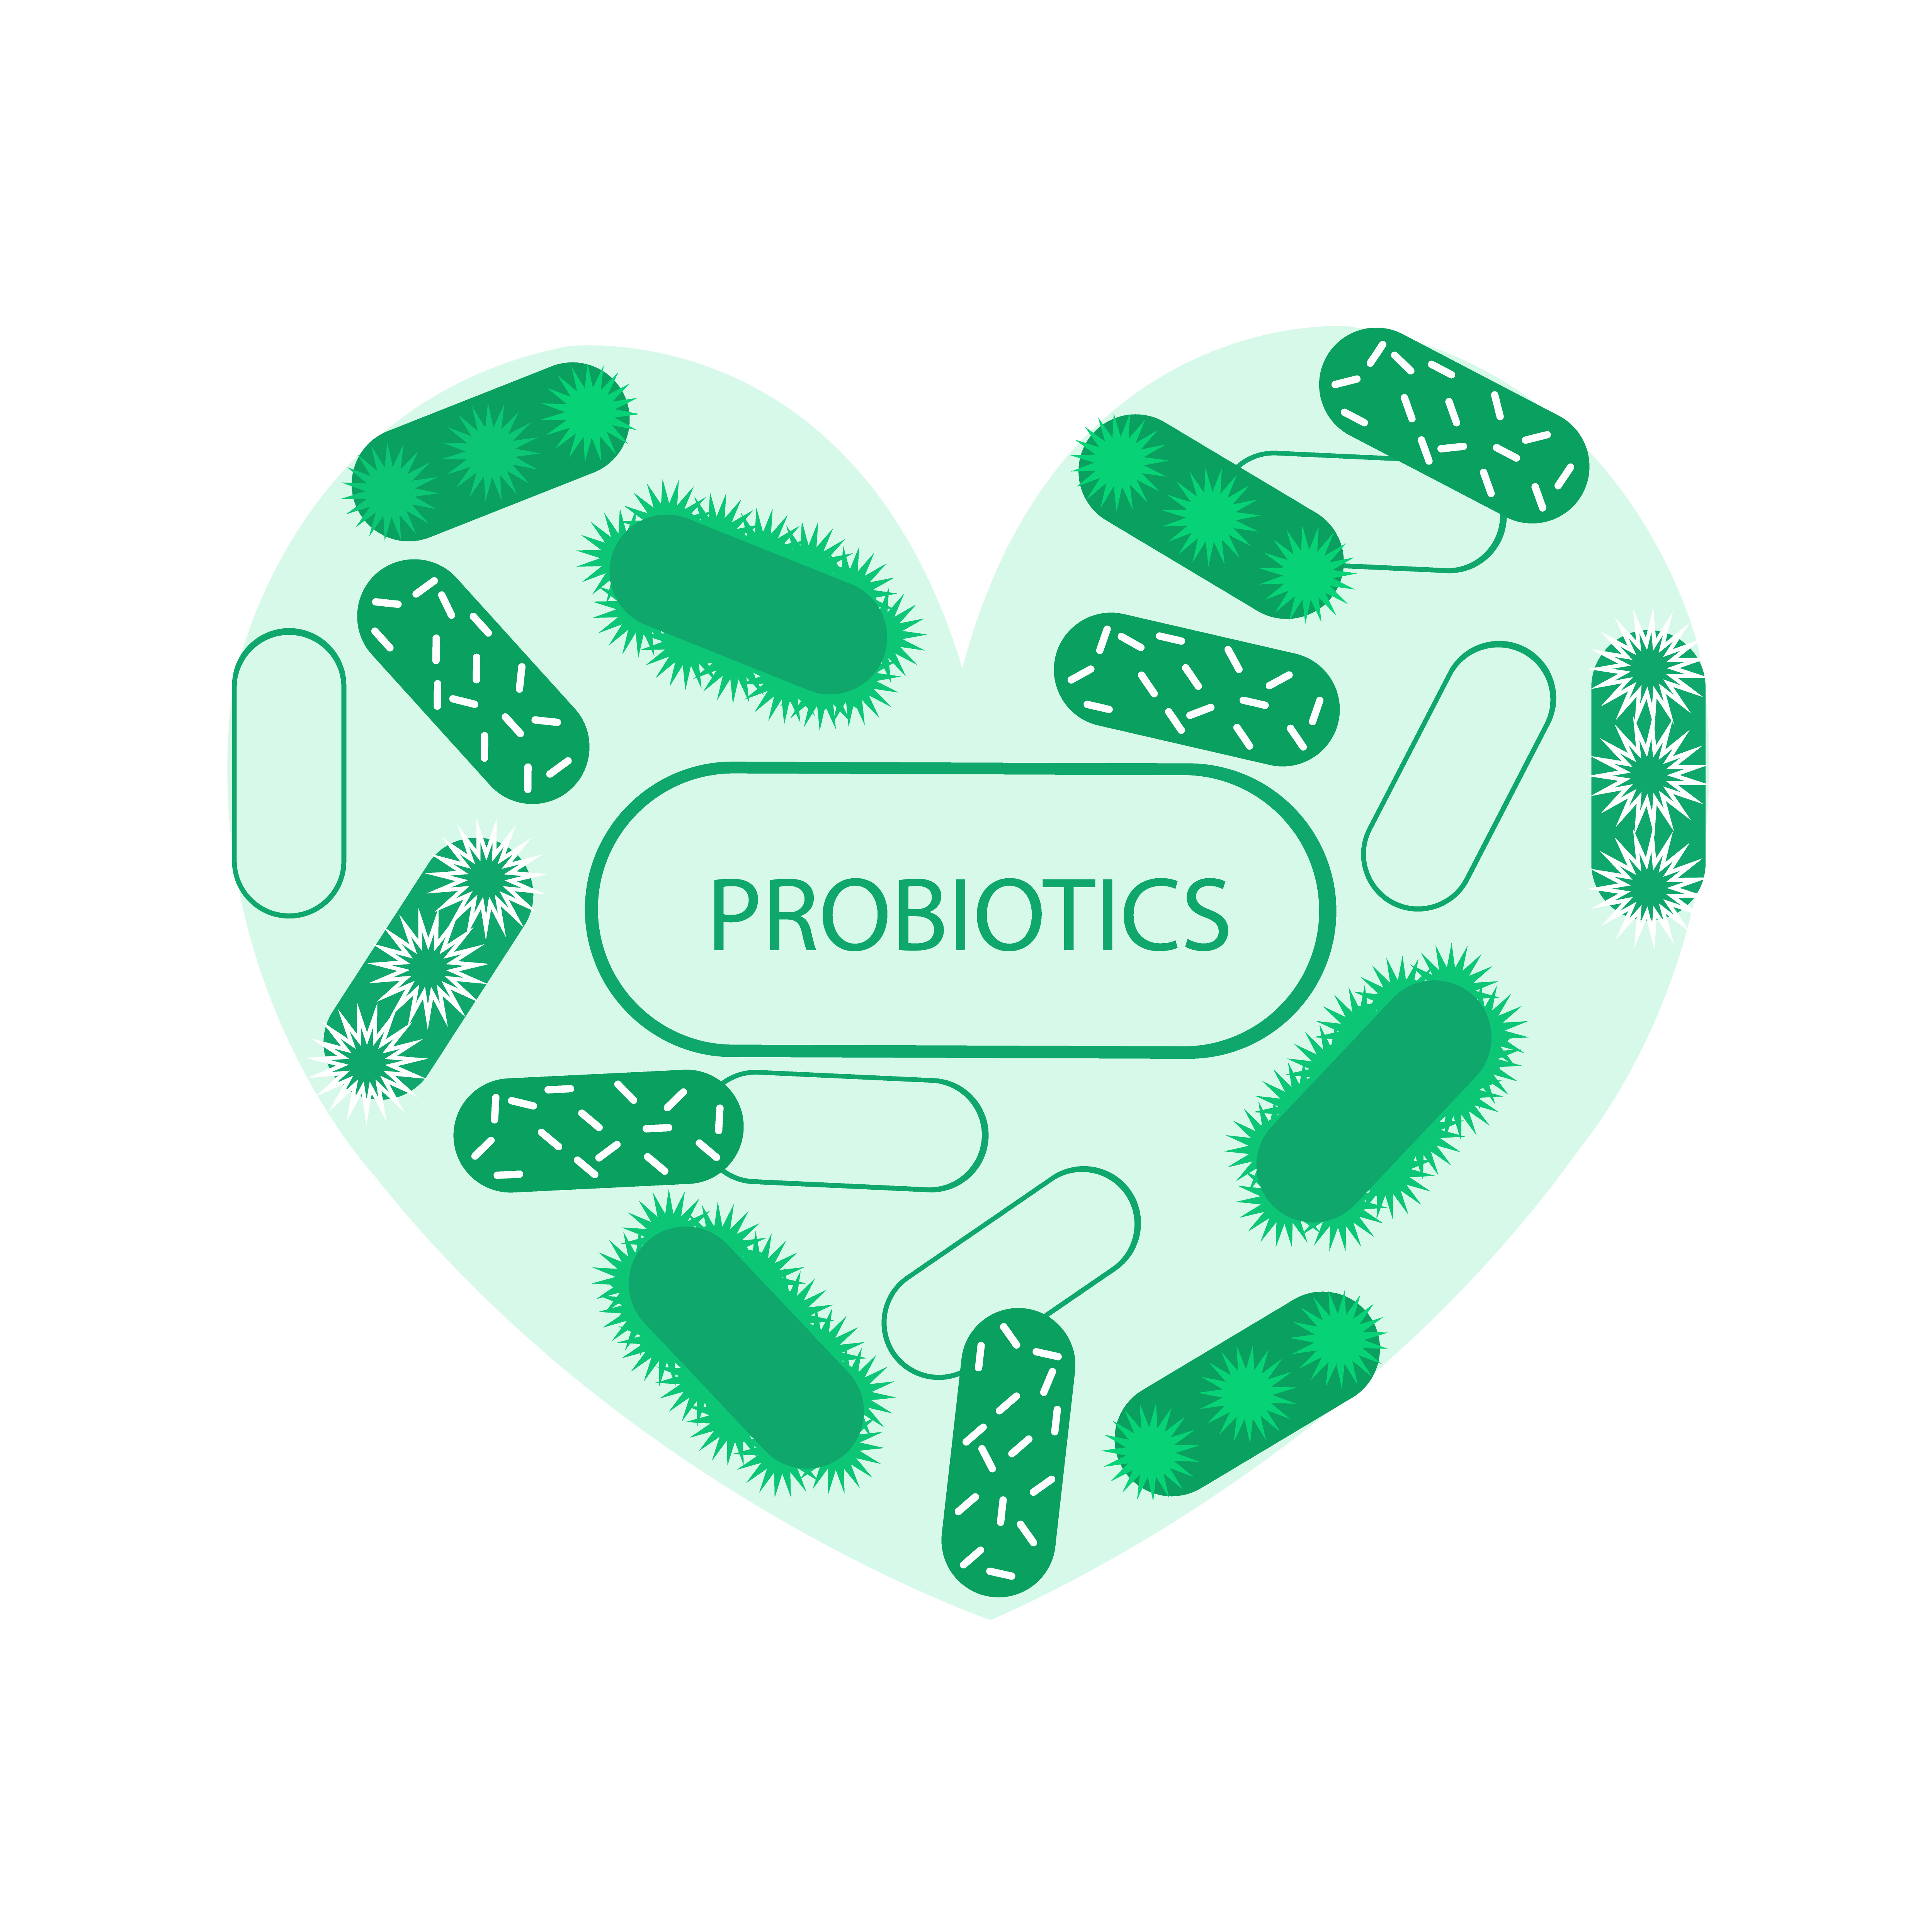 Made of Probiotic symbol heart and symbolic medical illustration of the intestinal bacterial flora